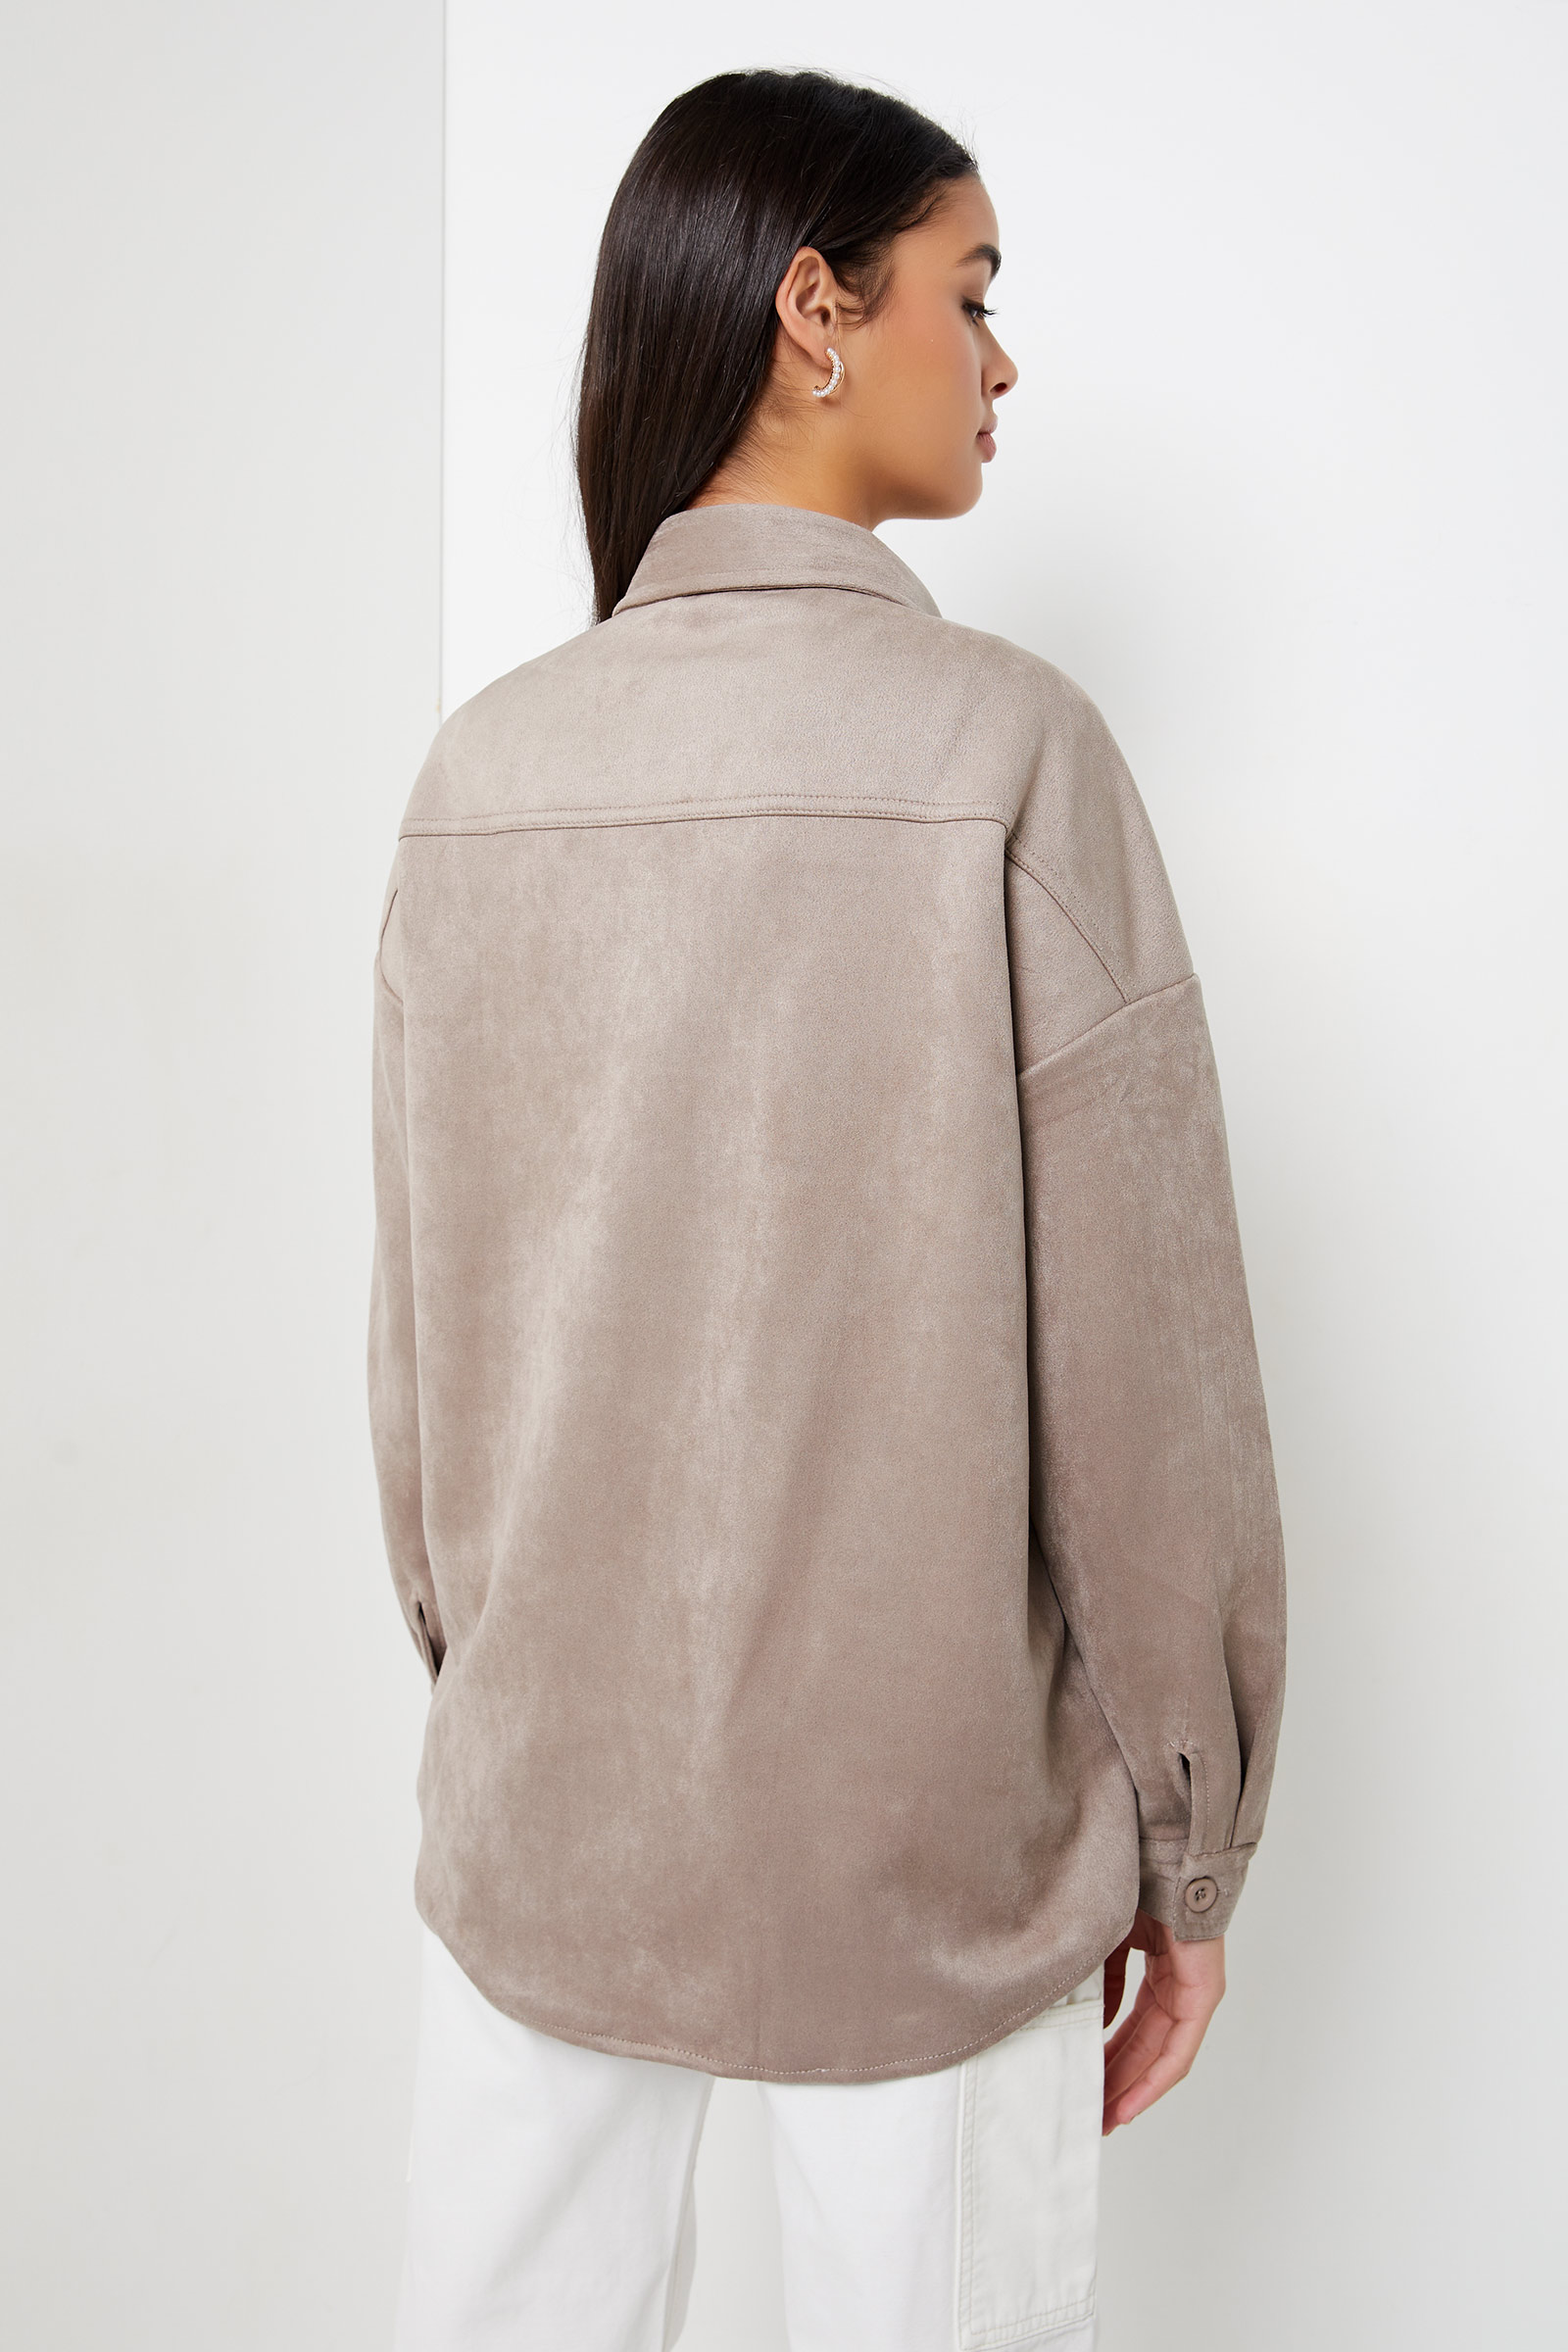 Microsuede Oversized Shirt